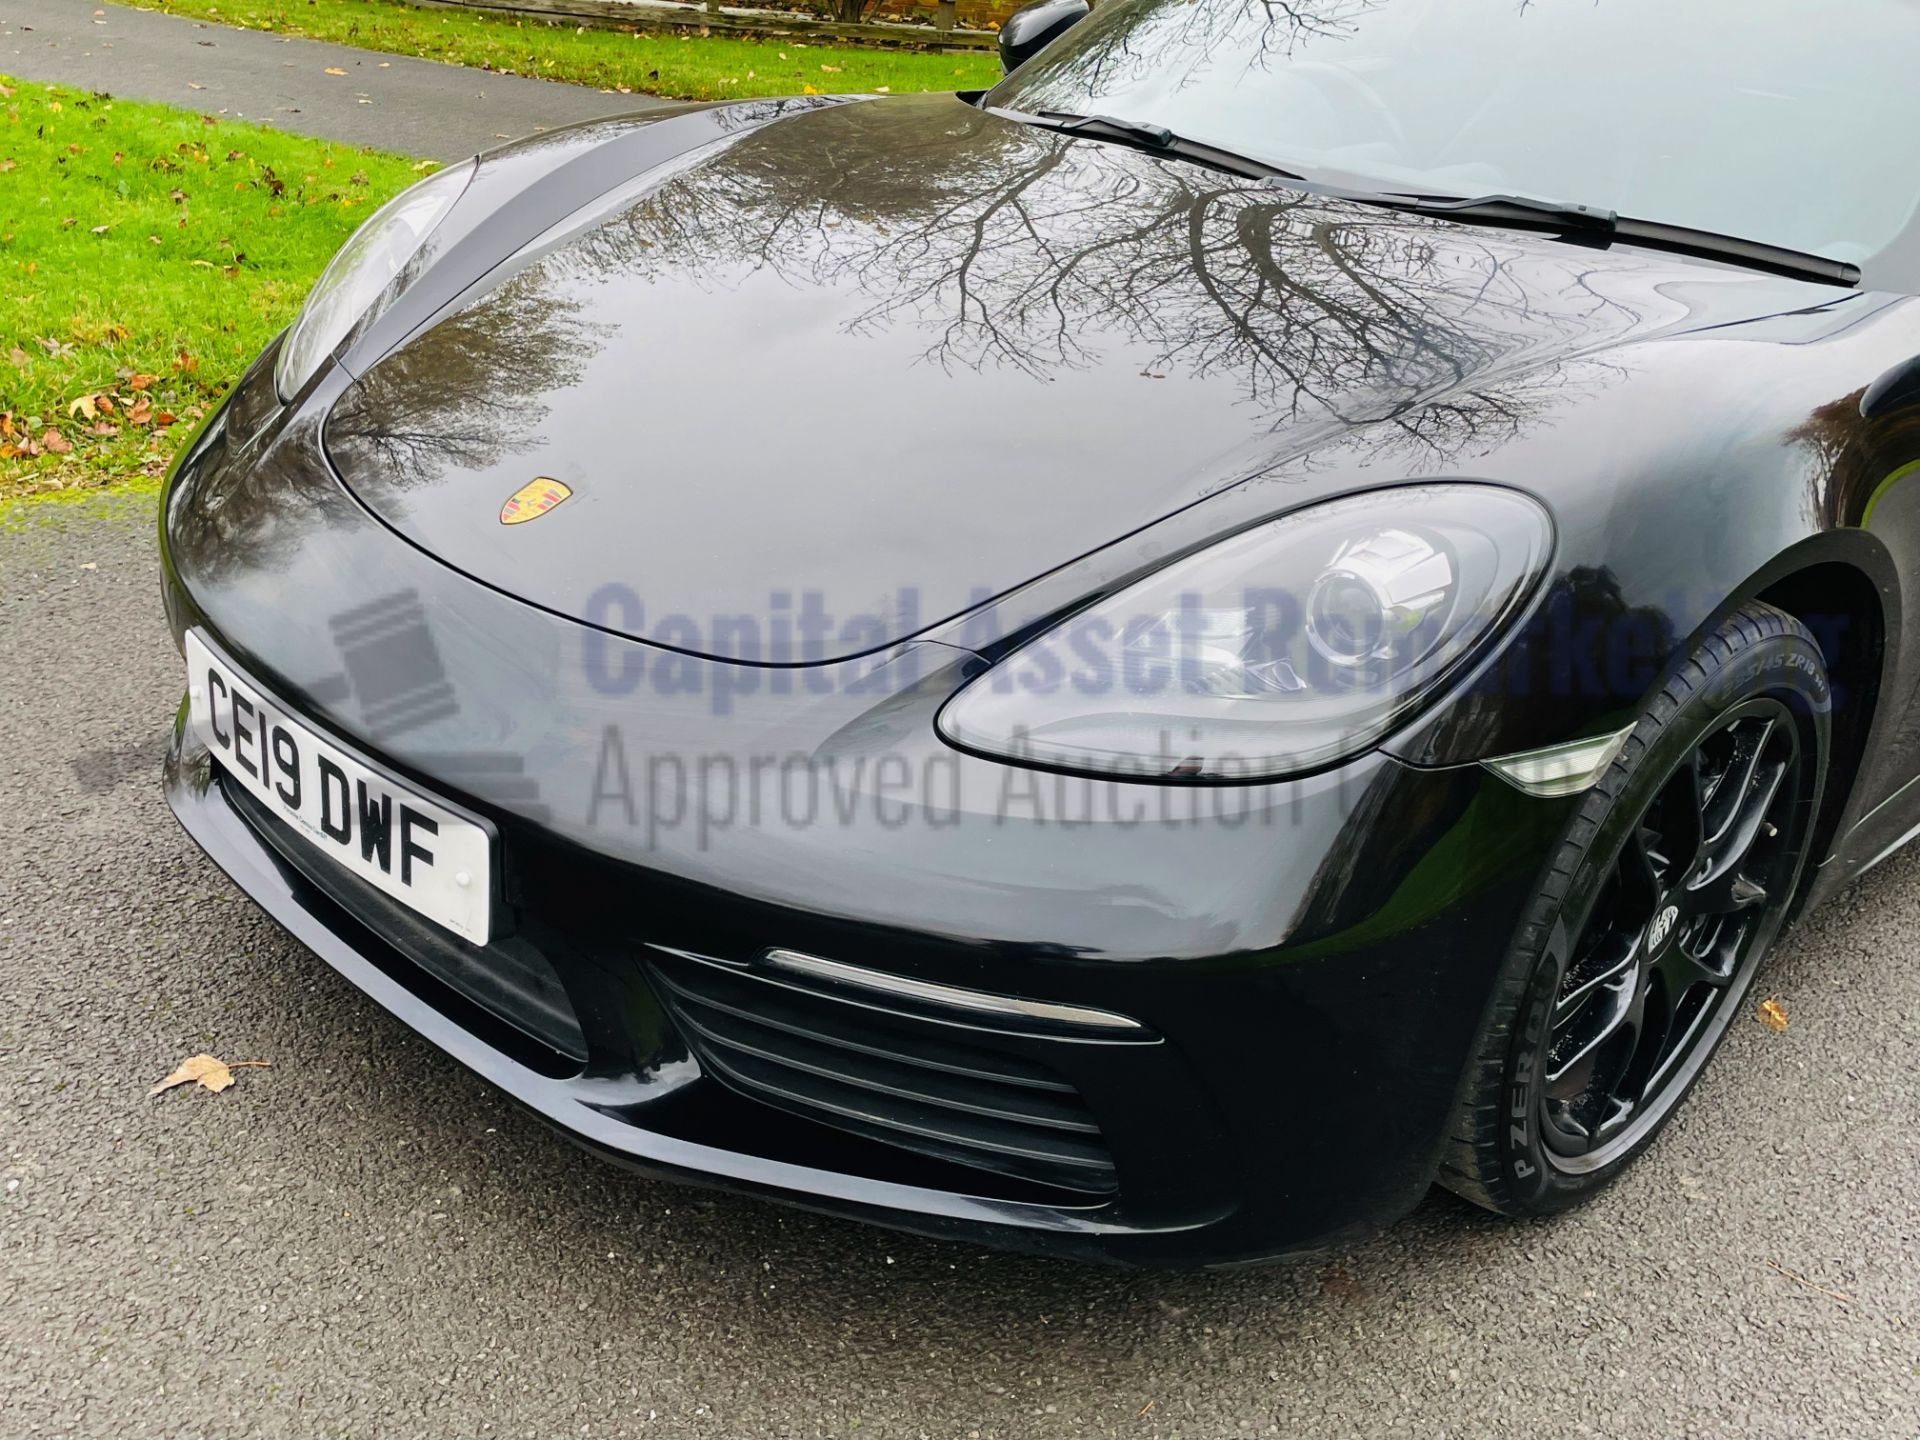 (On Sale) PORSCHE 718 CAYMAN *COUPE* (2019 - NEW MODEL) '2.0 PETROL' *SPORTS EXHAUST -NAV* (1 OWNER) - Image 16 of 51